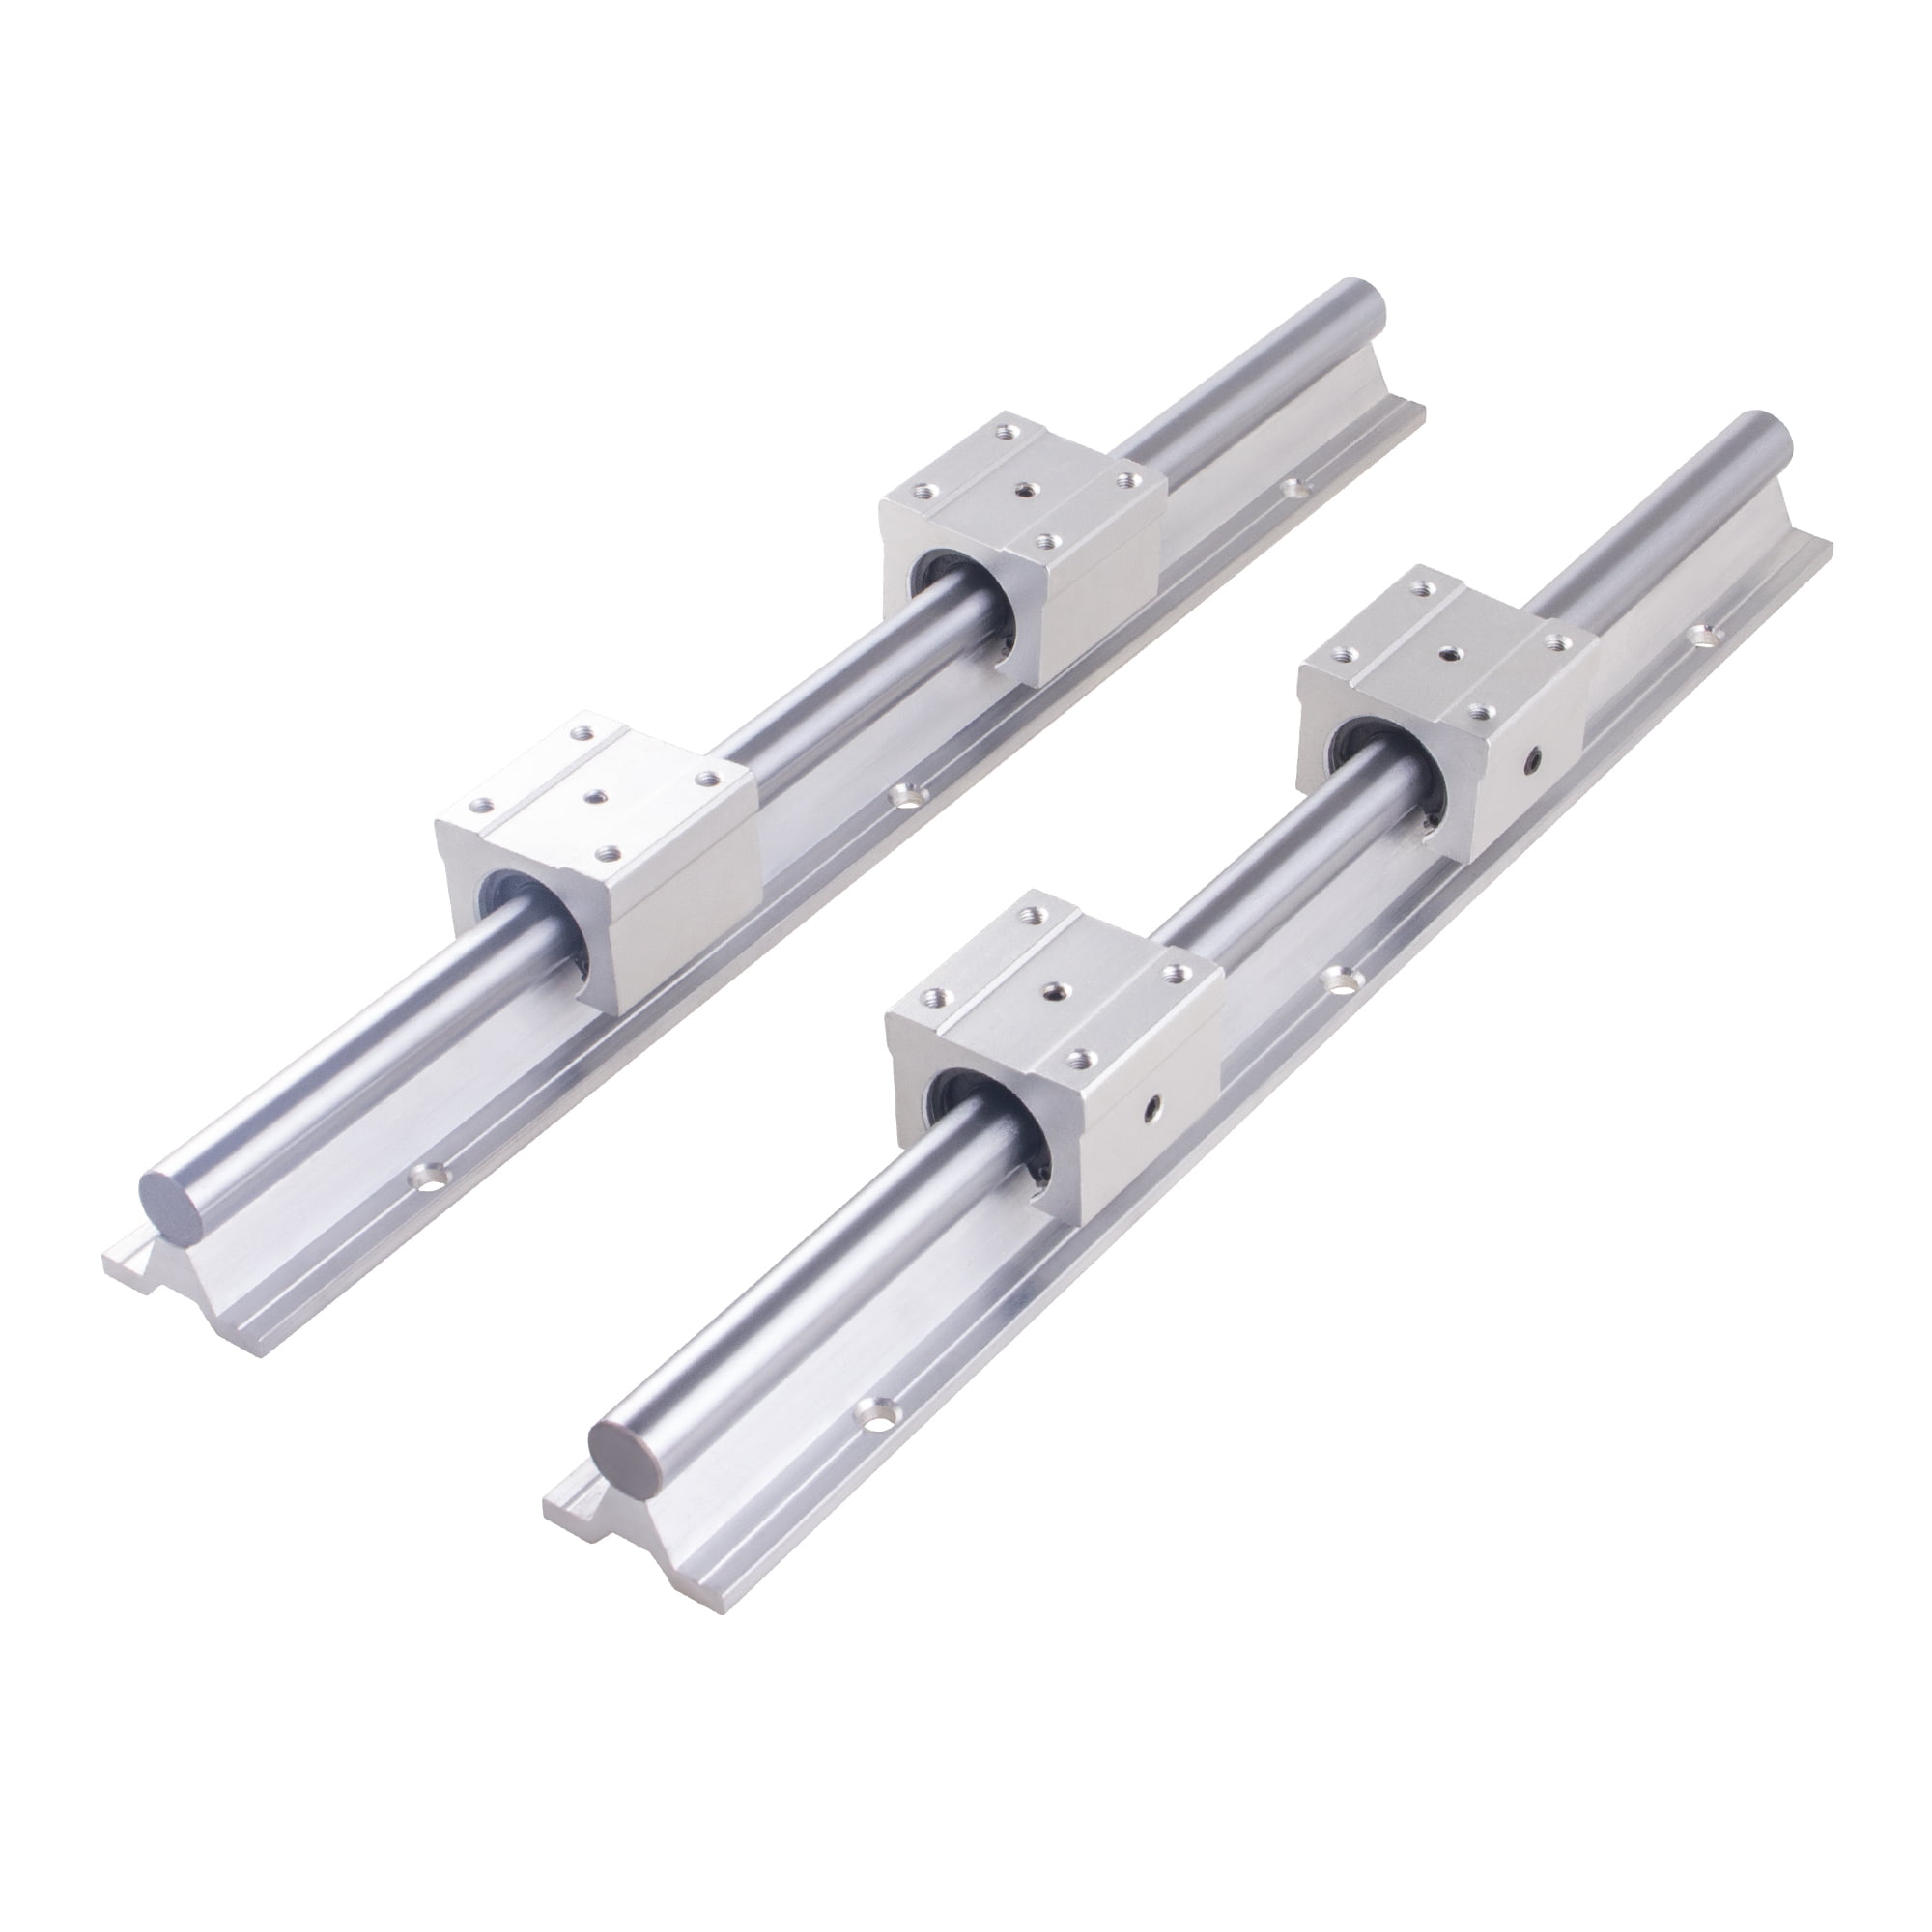 2X SBR20 20mm Linear Rail Guide Slide Shaft Rod Fully Supported 300-1500mm US 